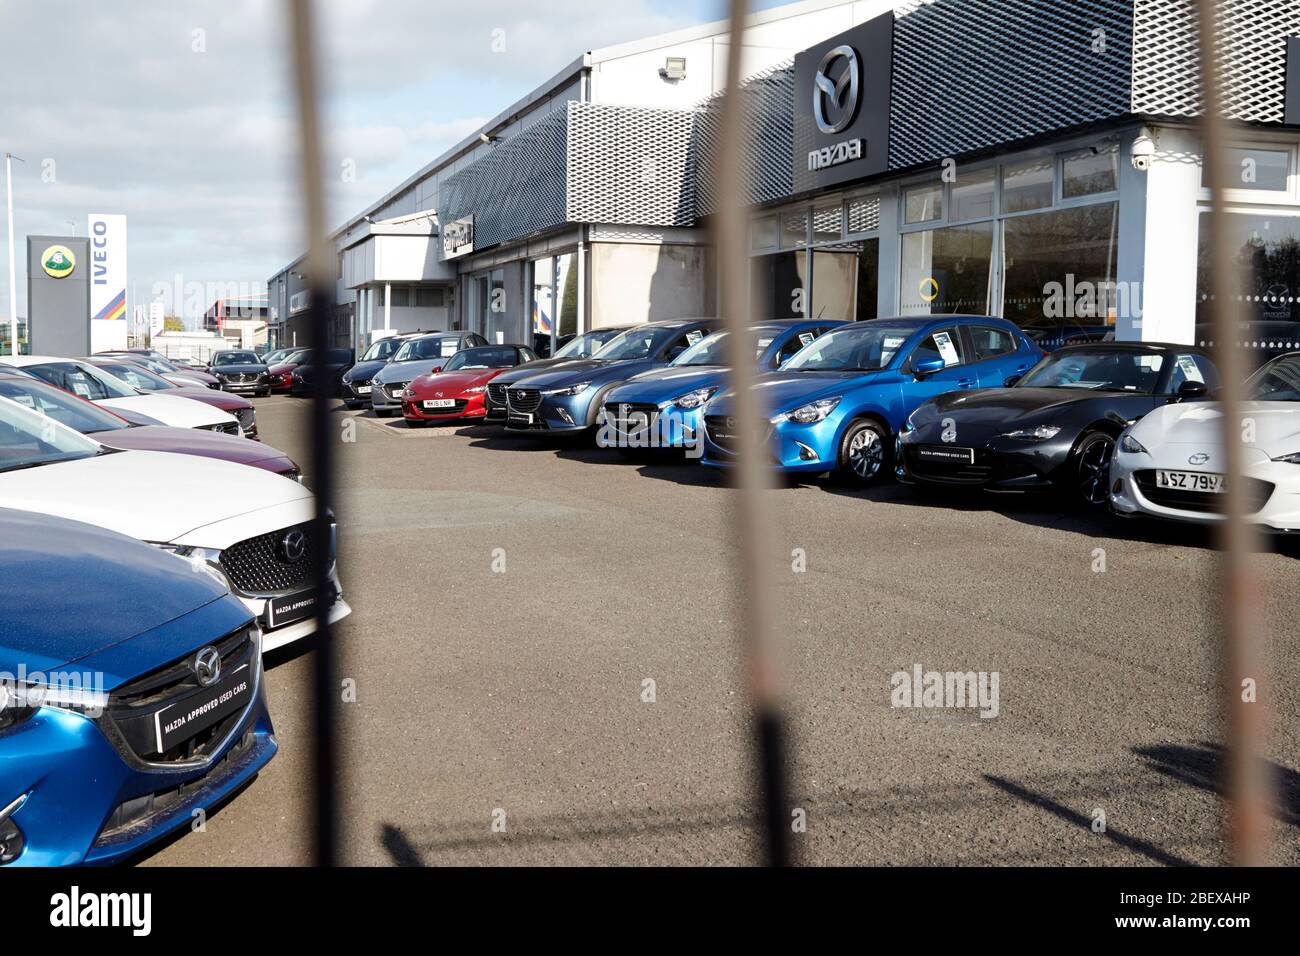 new and used cars unsold behind fence of closed car dealership due to coronavirus lockdown Newtownabbey Northern Ireland UK Stock Photo